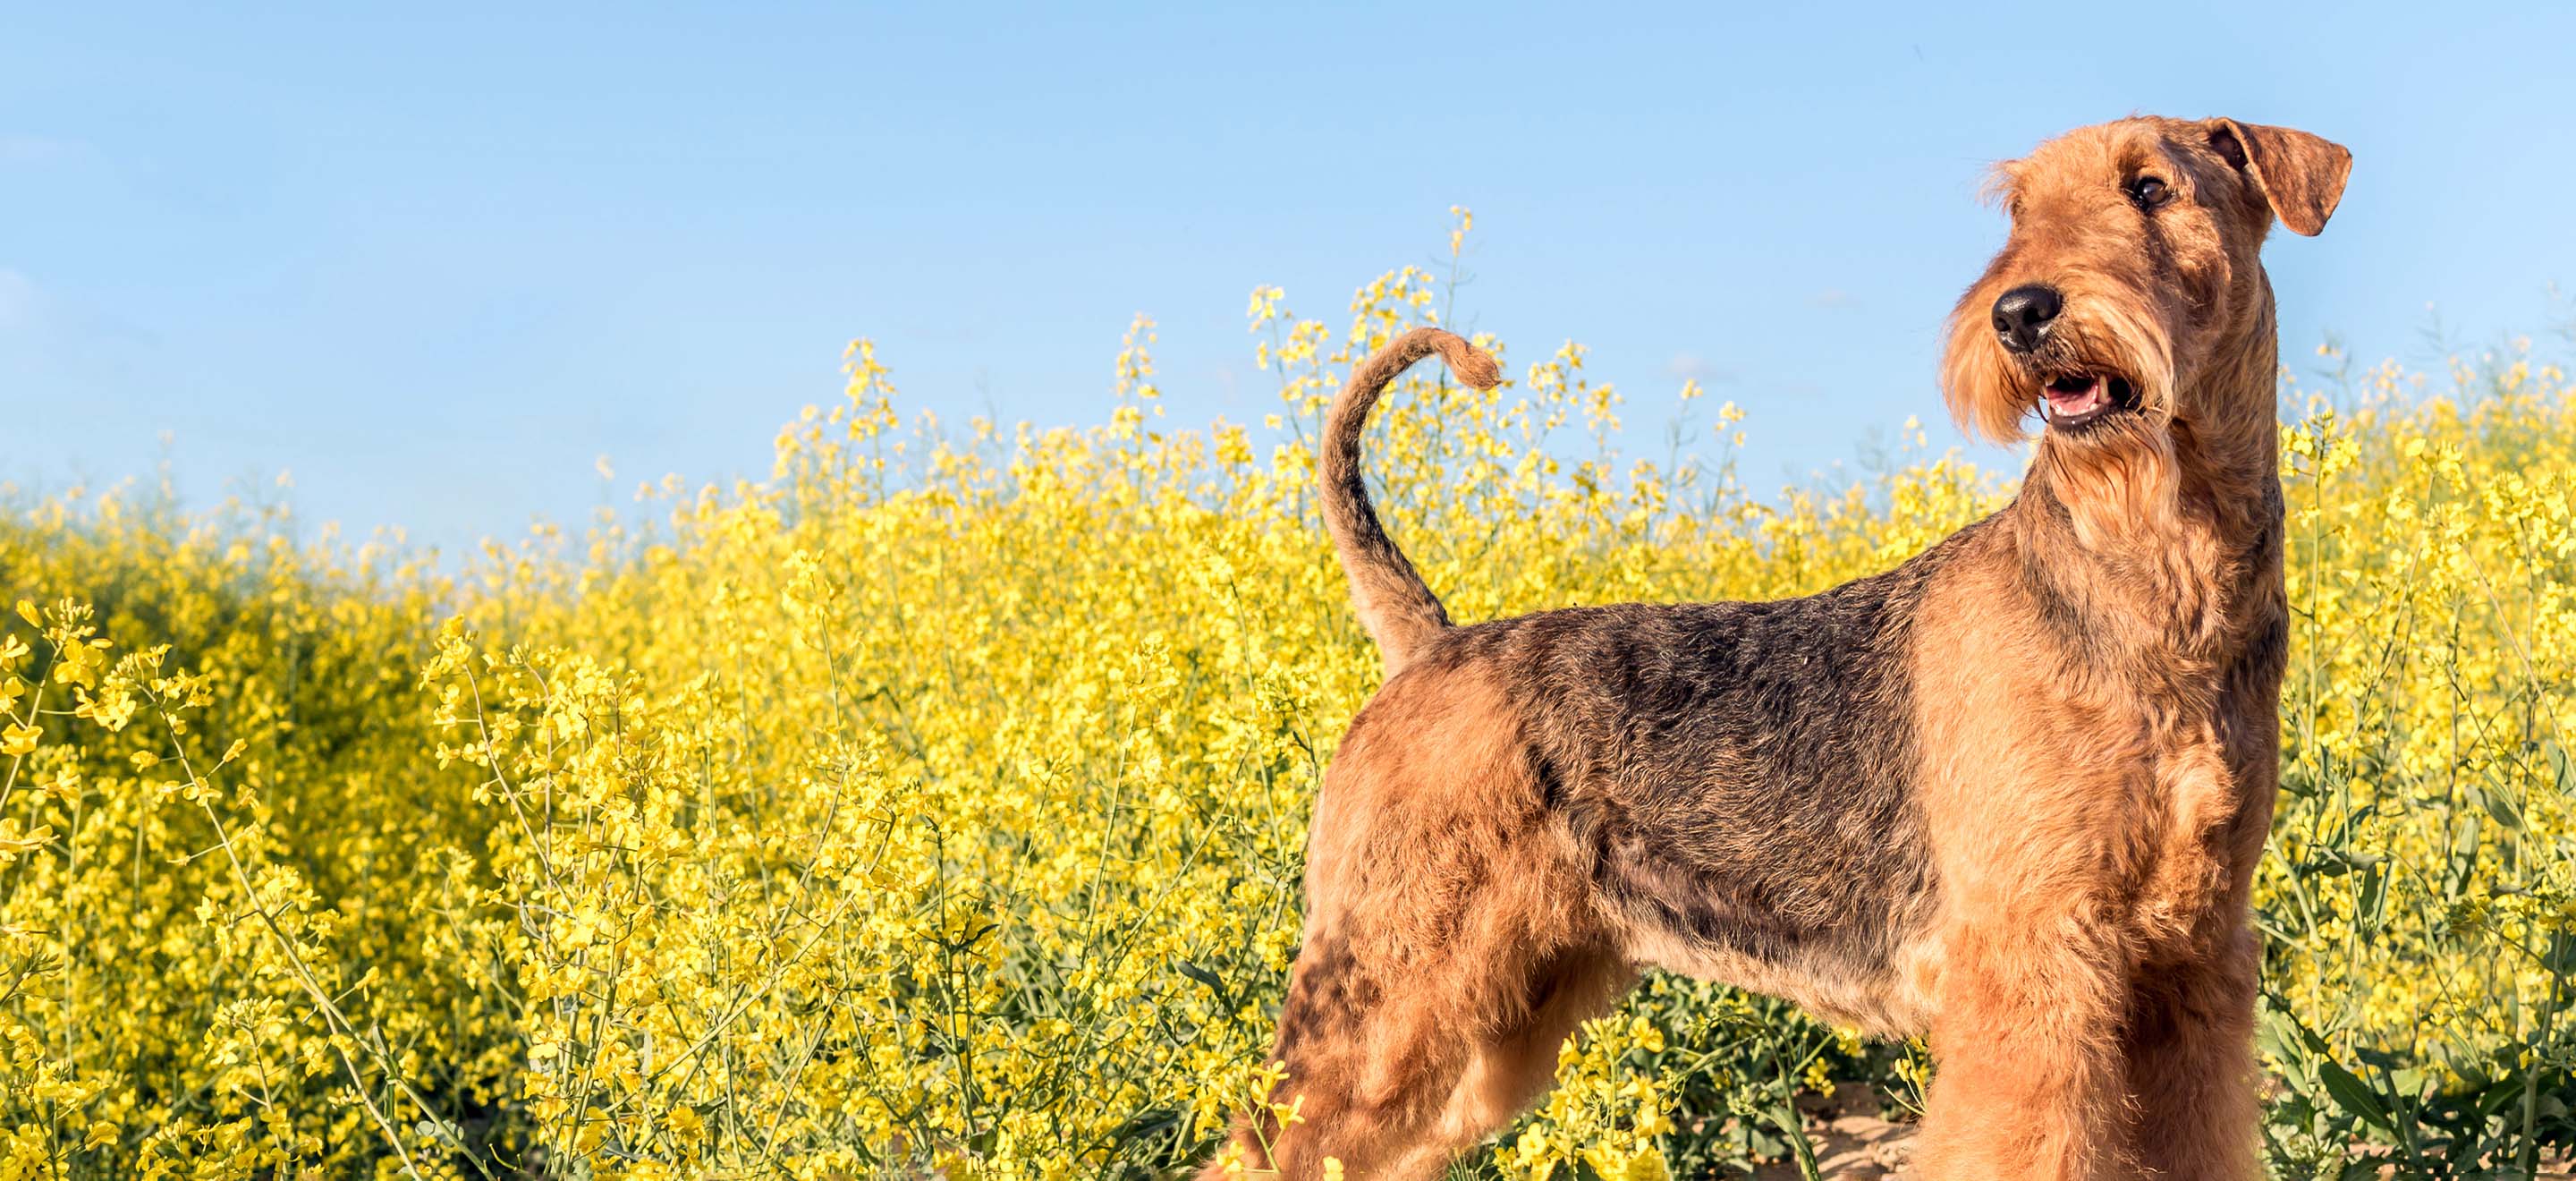 An Airedale Terrier dog standing in a field of yellow wildflowers image